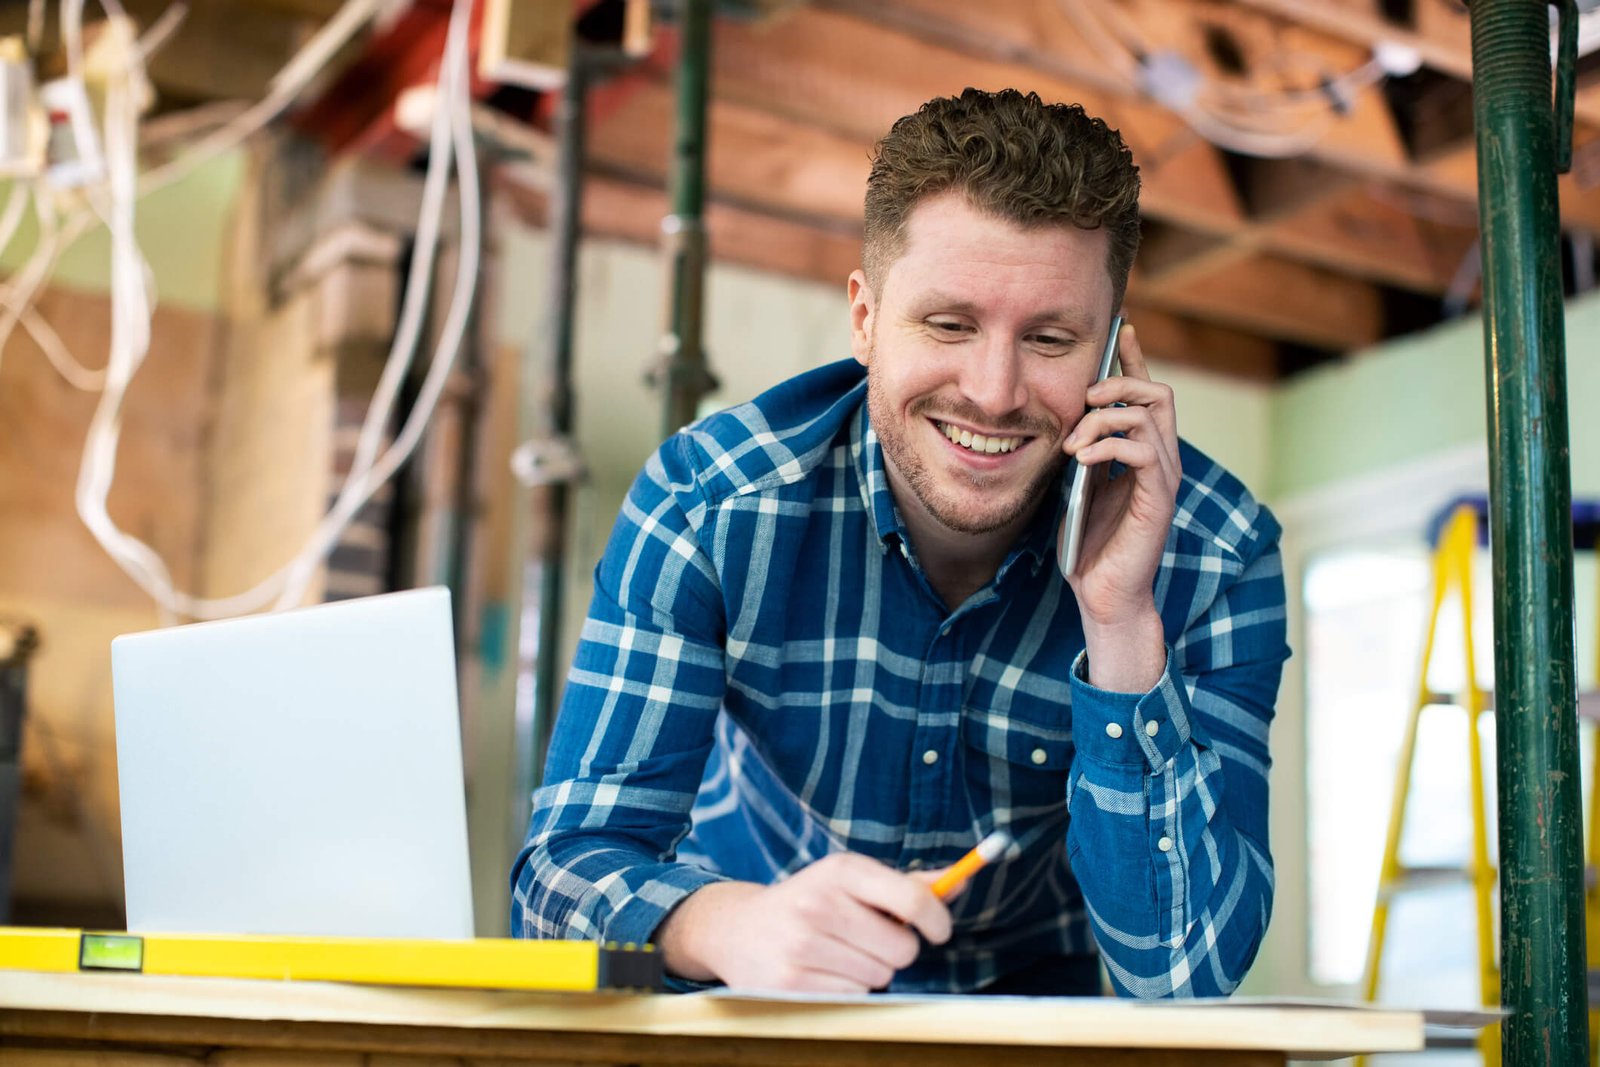 Saskatchewan Business Owner talking on the phone smiling in his shop with their financial planner